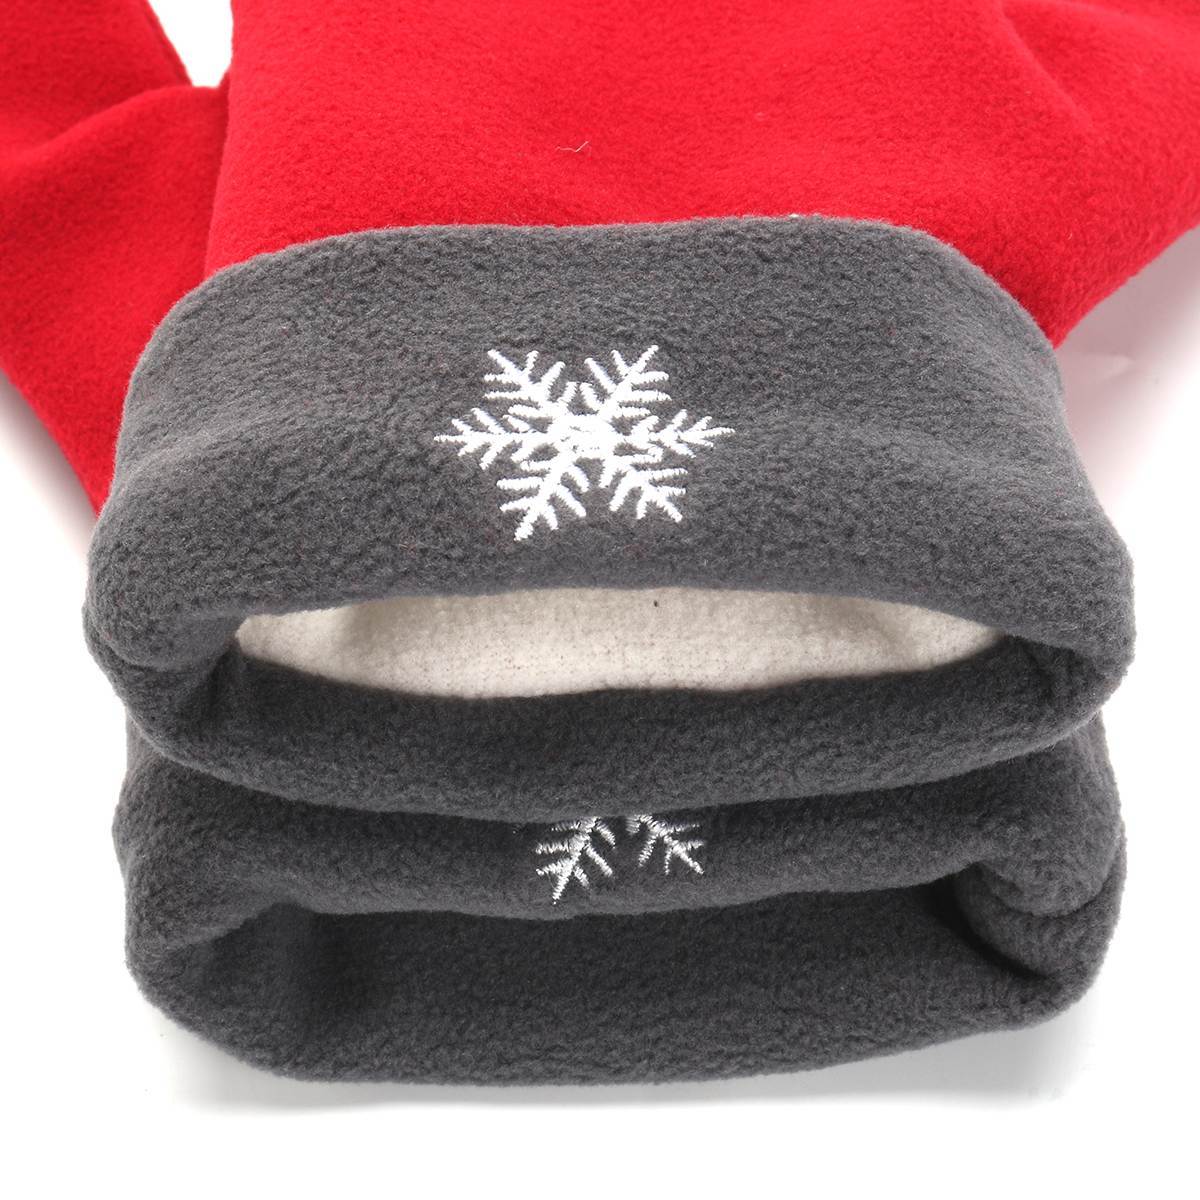 Couple Lovers Gloves Polar Fleece Sweethearts Thicken Winter Warm Lining Glove Christmas Gift Lovers Mittens - Roy Entreprise